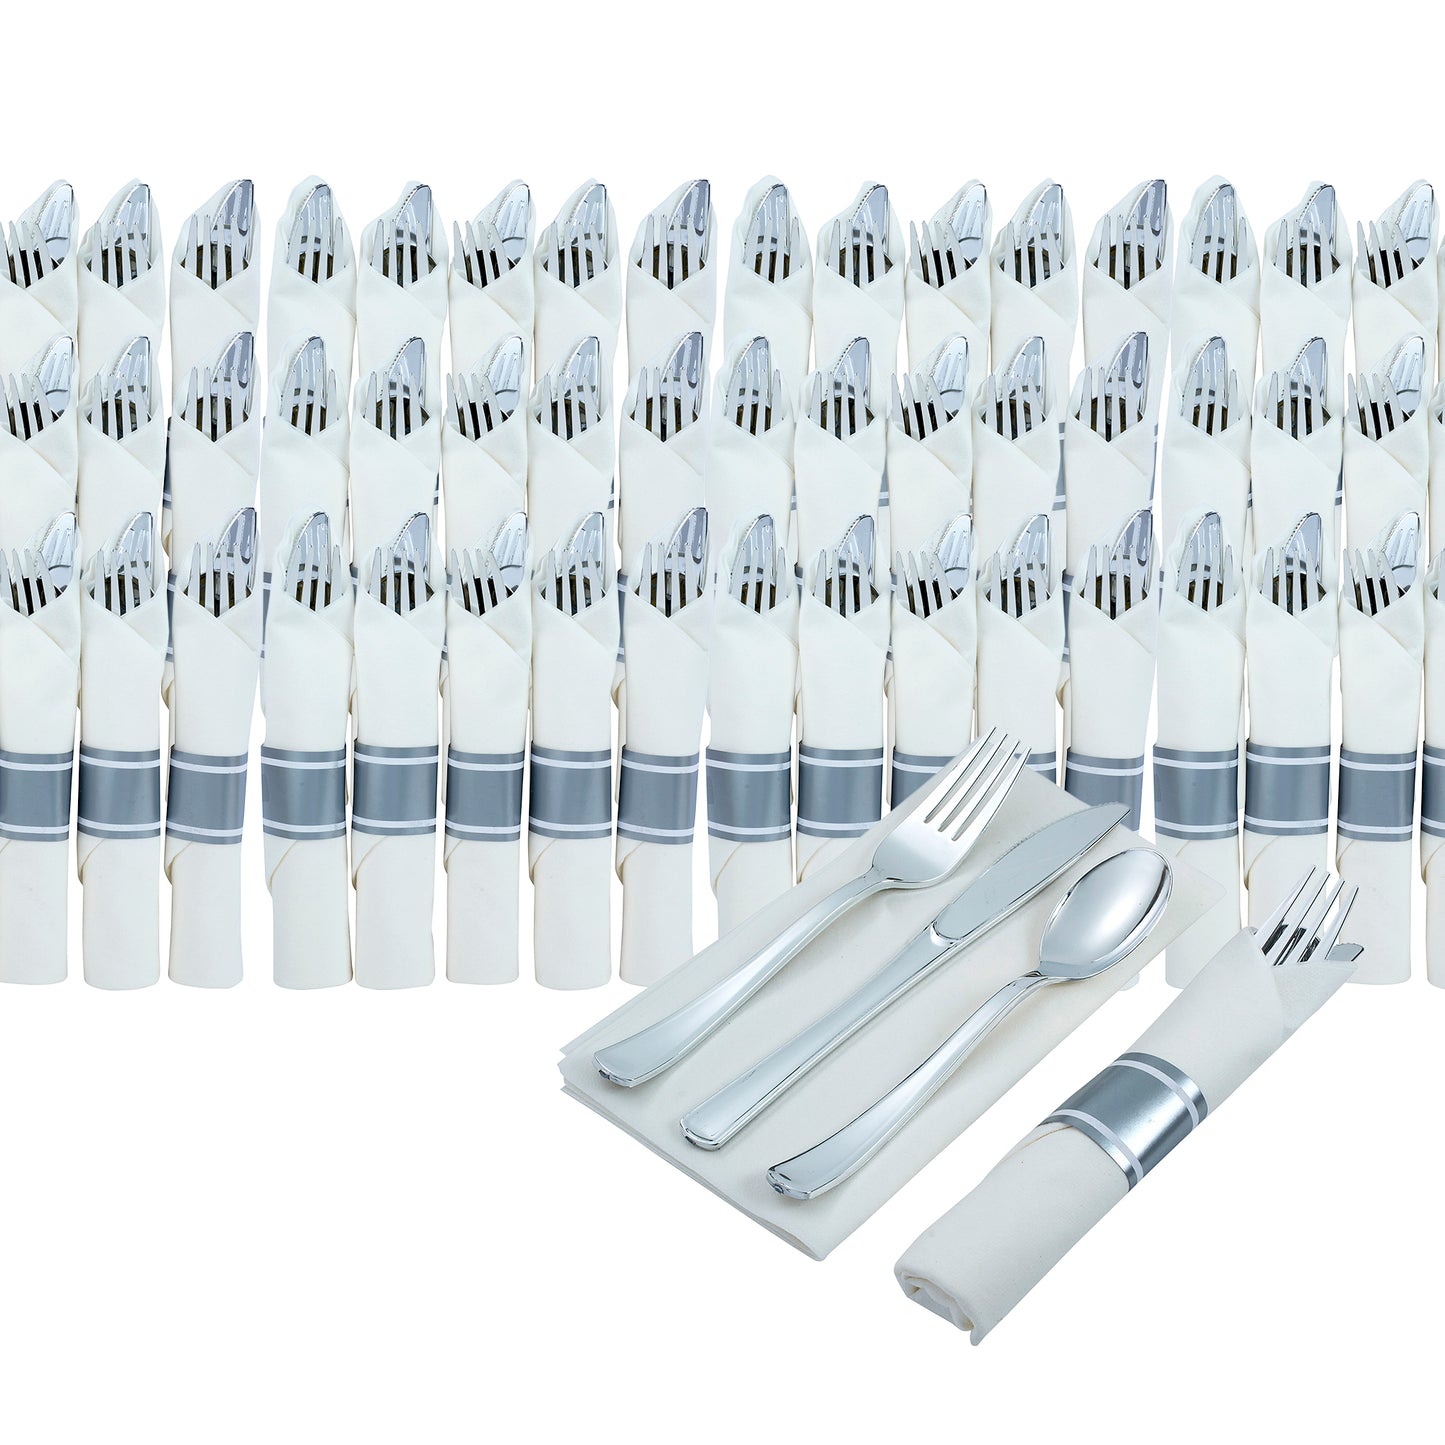 200 Piece Pre-rolled silver-colored plastic silverware set (for 50 guests) In each napkin pack, you will find 1 fork, 1 knife, and 1 spoon, all wrapped up inside.